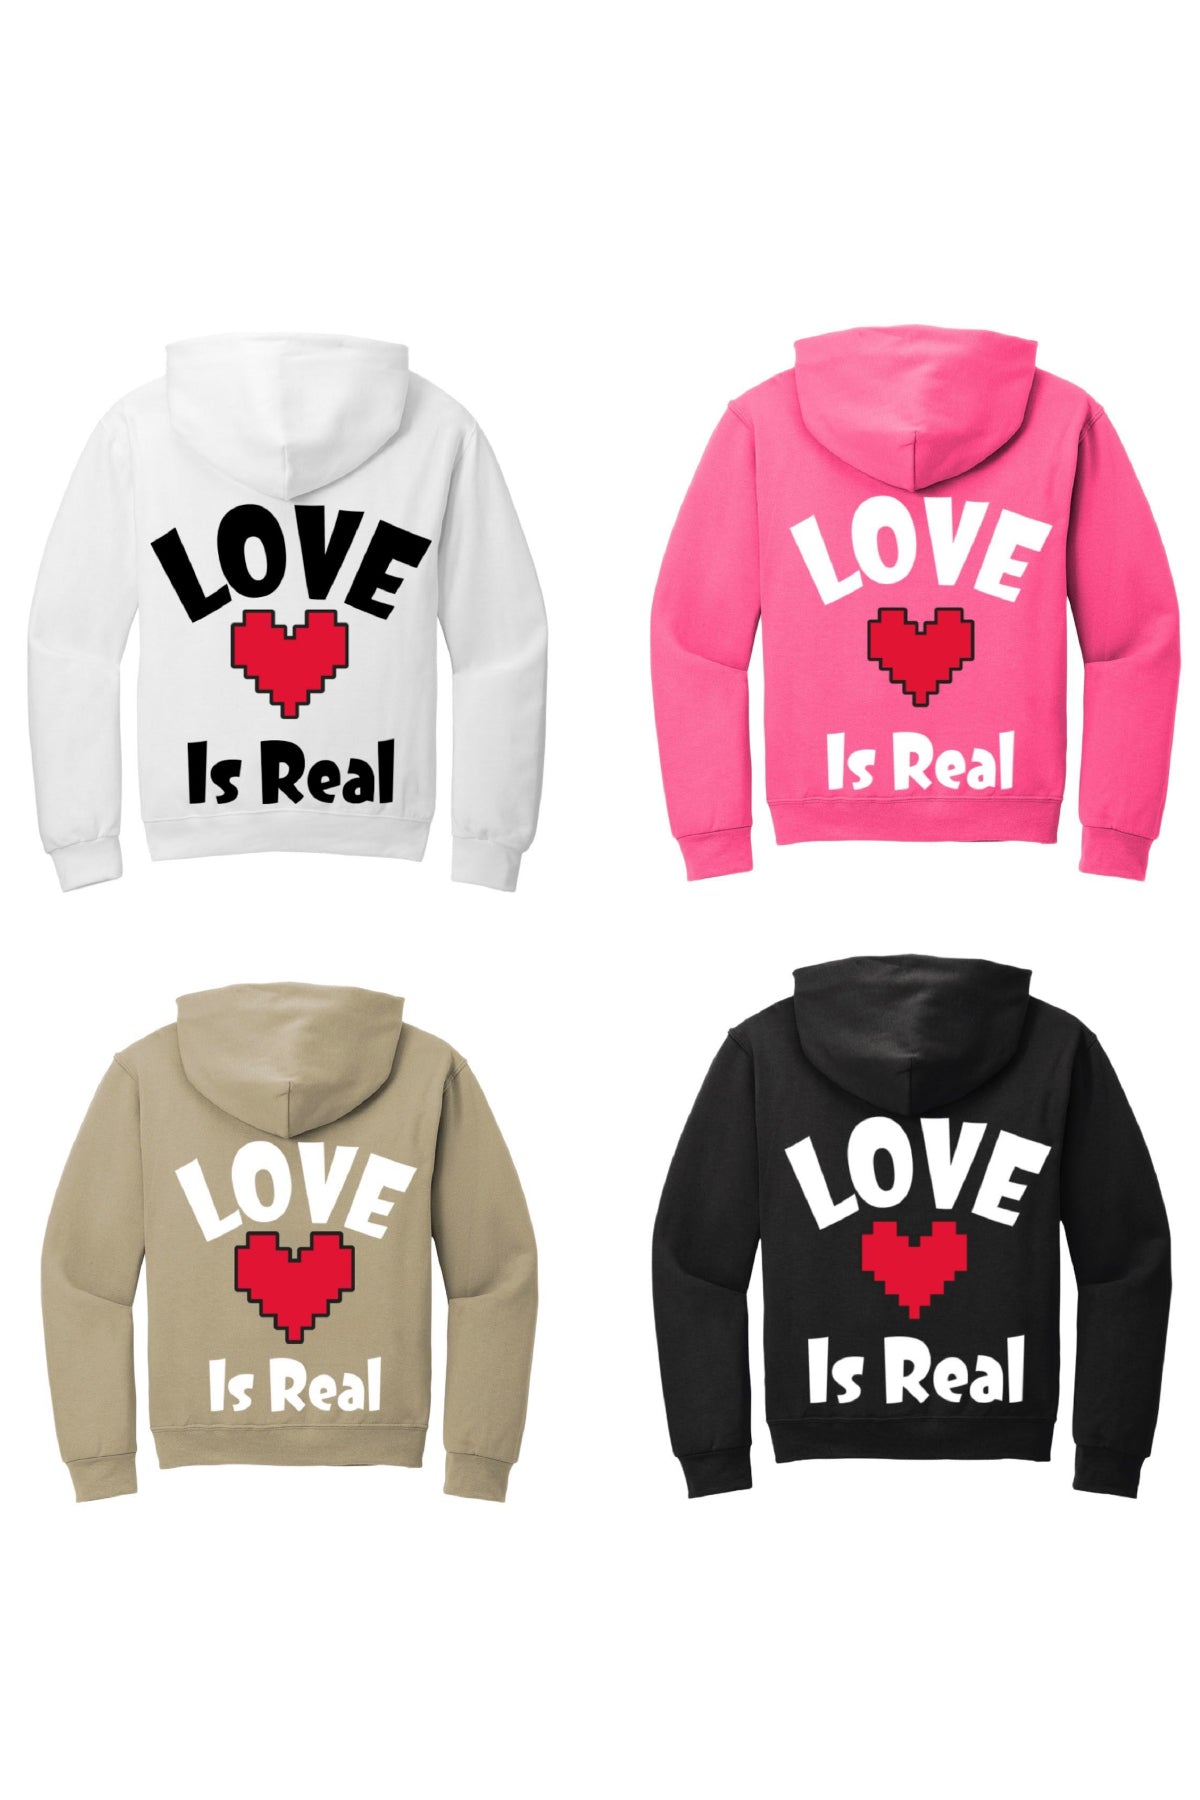 “Love Is Real” Printed Hoodies for Men and Women-Pink